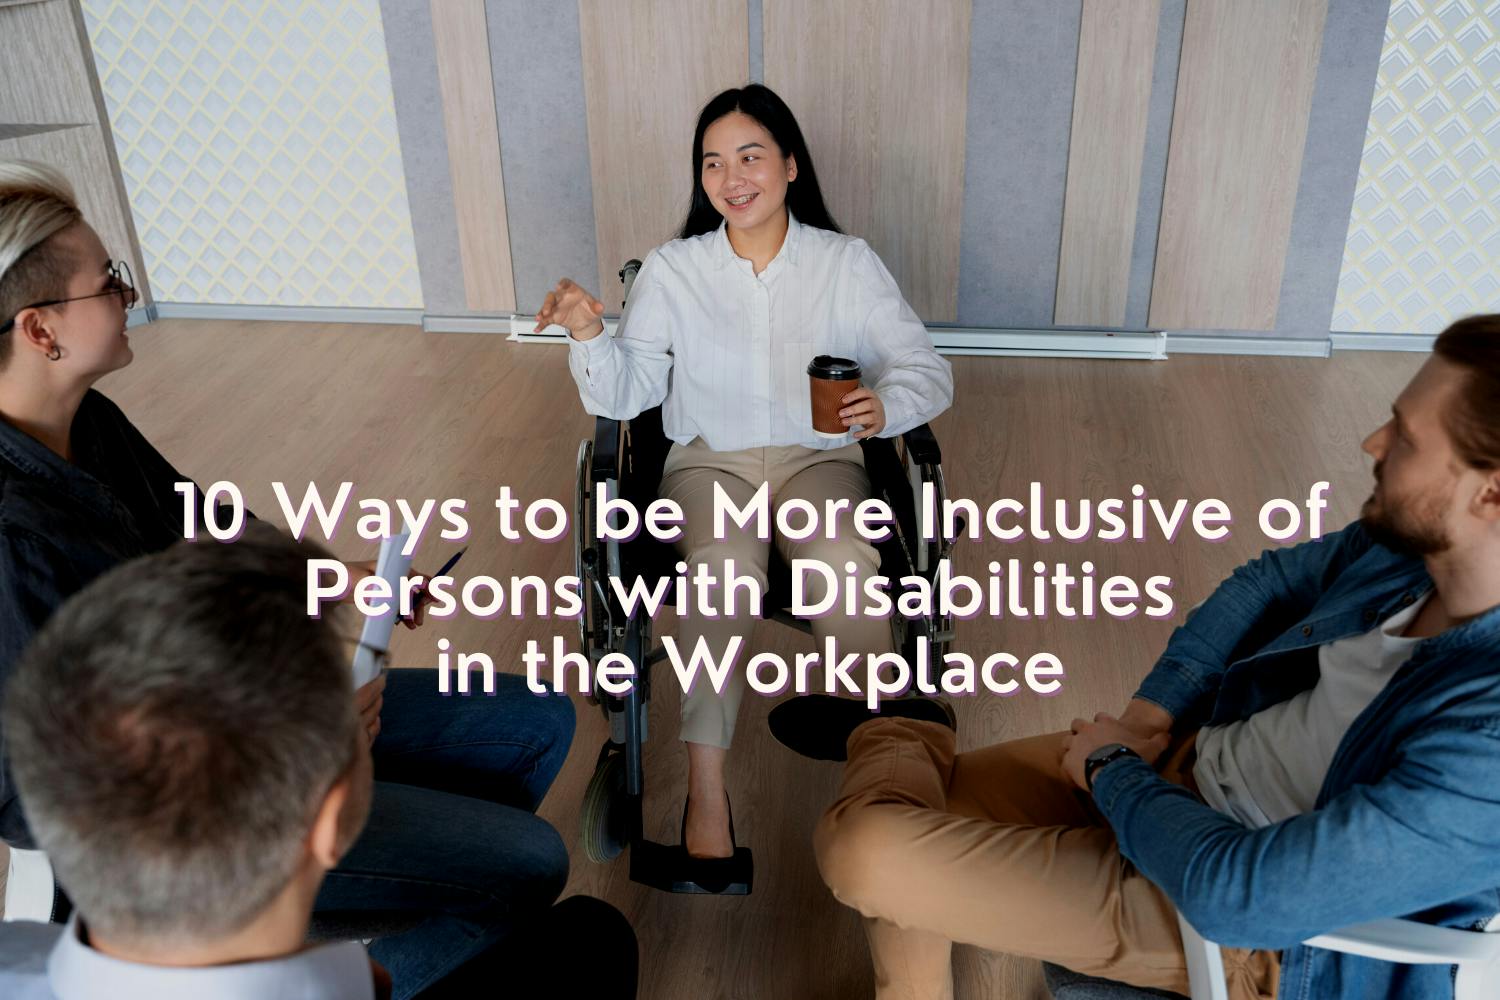 10 Ways to be More Inclusive of Persons with Disabilities in the Workplace